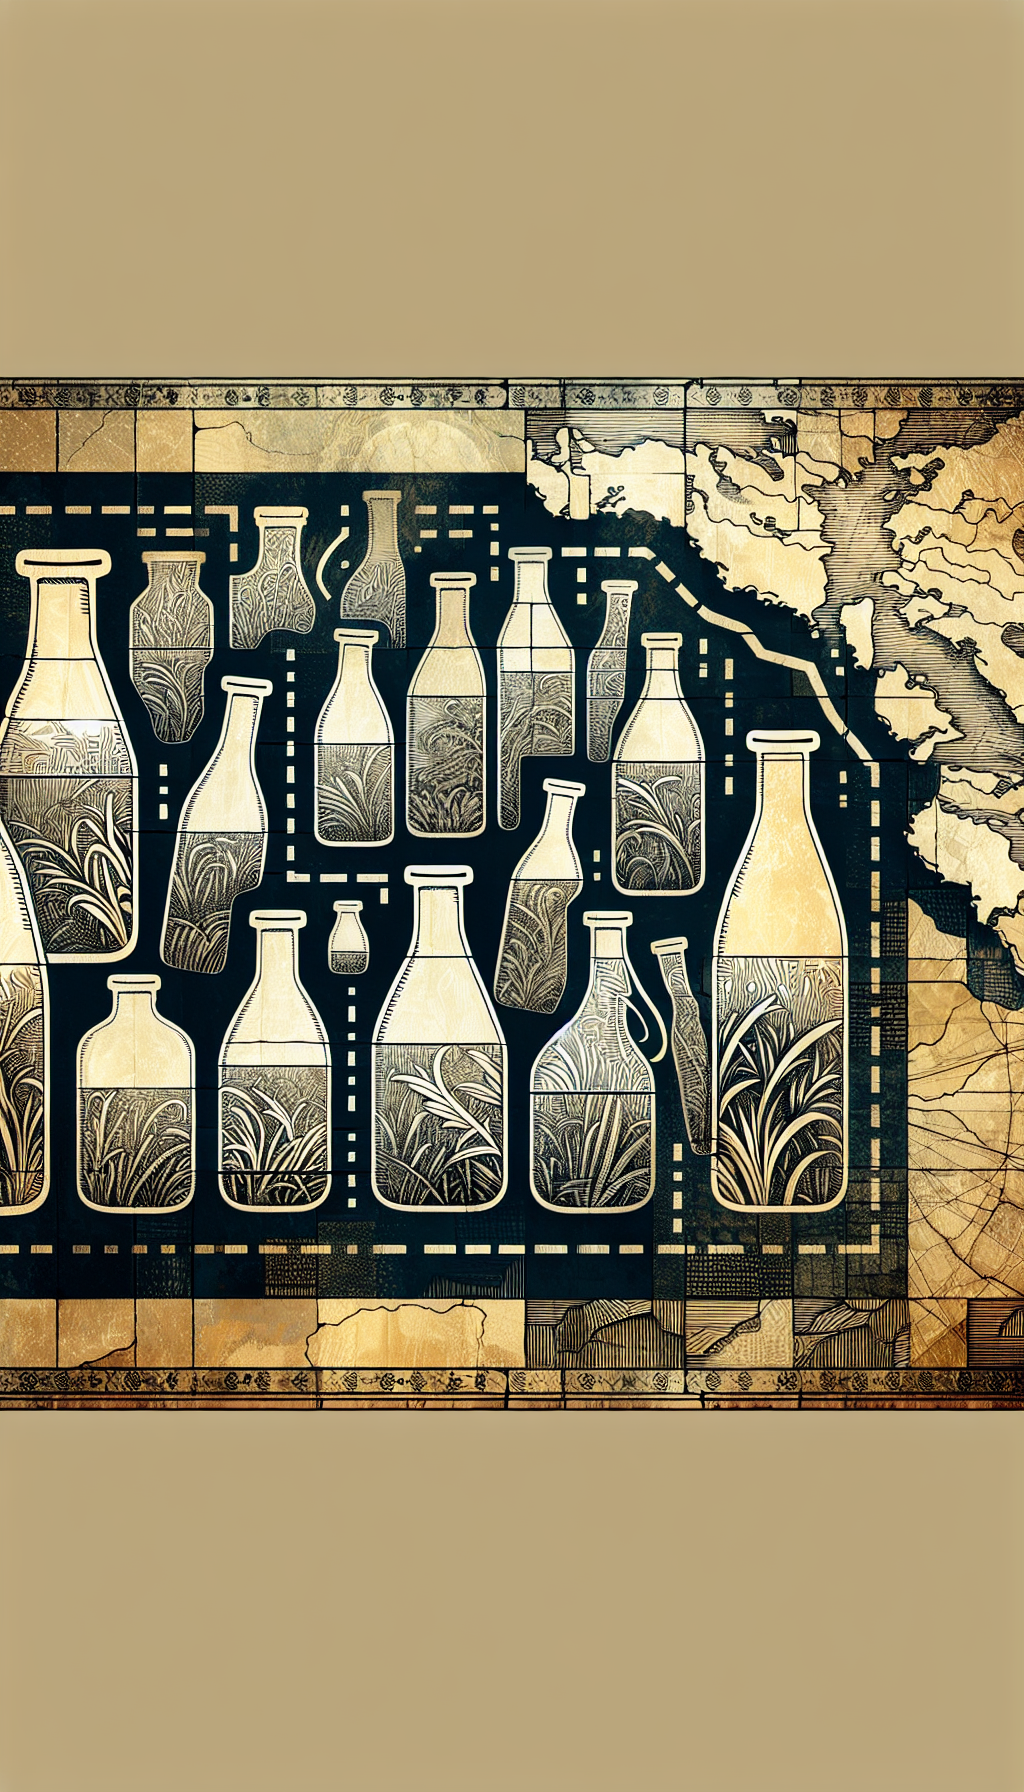 An artistic tapestry with textured patches shows a vintage map background cradling a scattered collection of stylized milk bottles from various regions—some etched glass, others bold linework—each casting a unique shadow inscribed with values. This patchwork subtly hints at terrains influencing the bottles' shapes and designs, illustrating the geographical impact on their collectible worth.